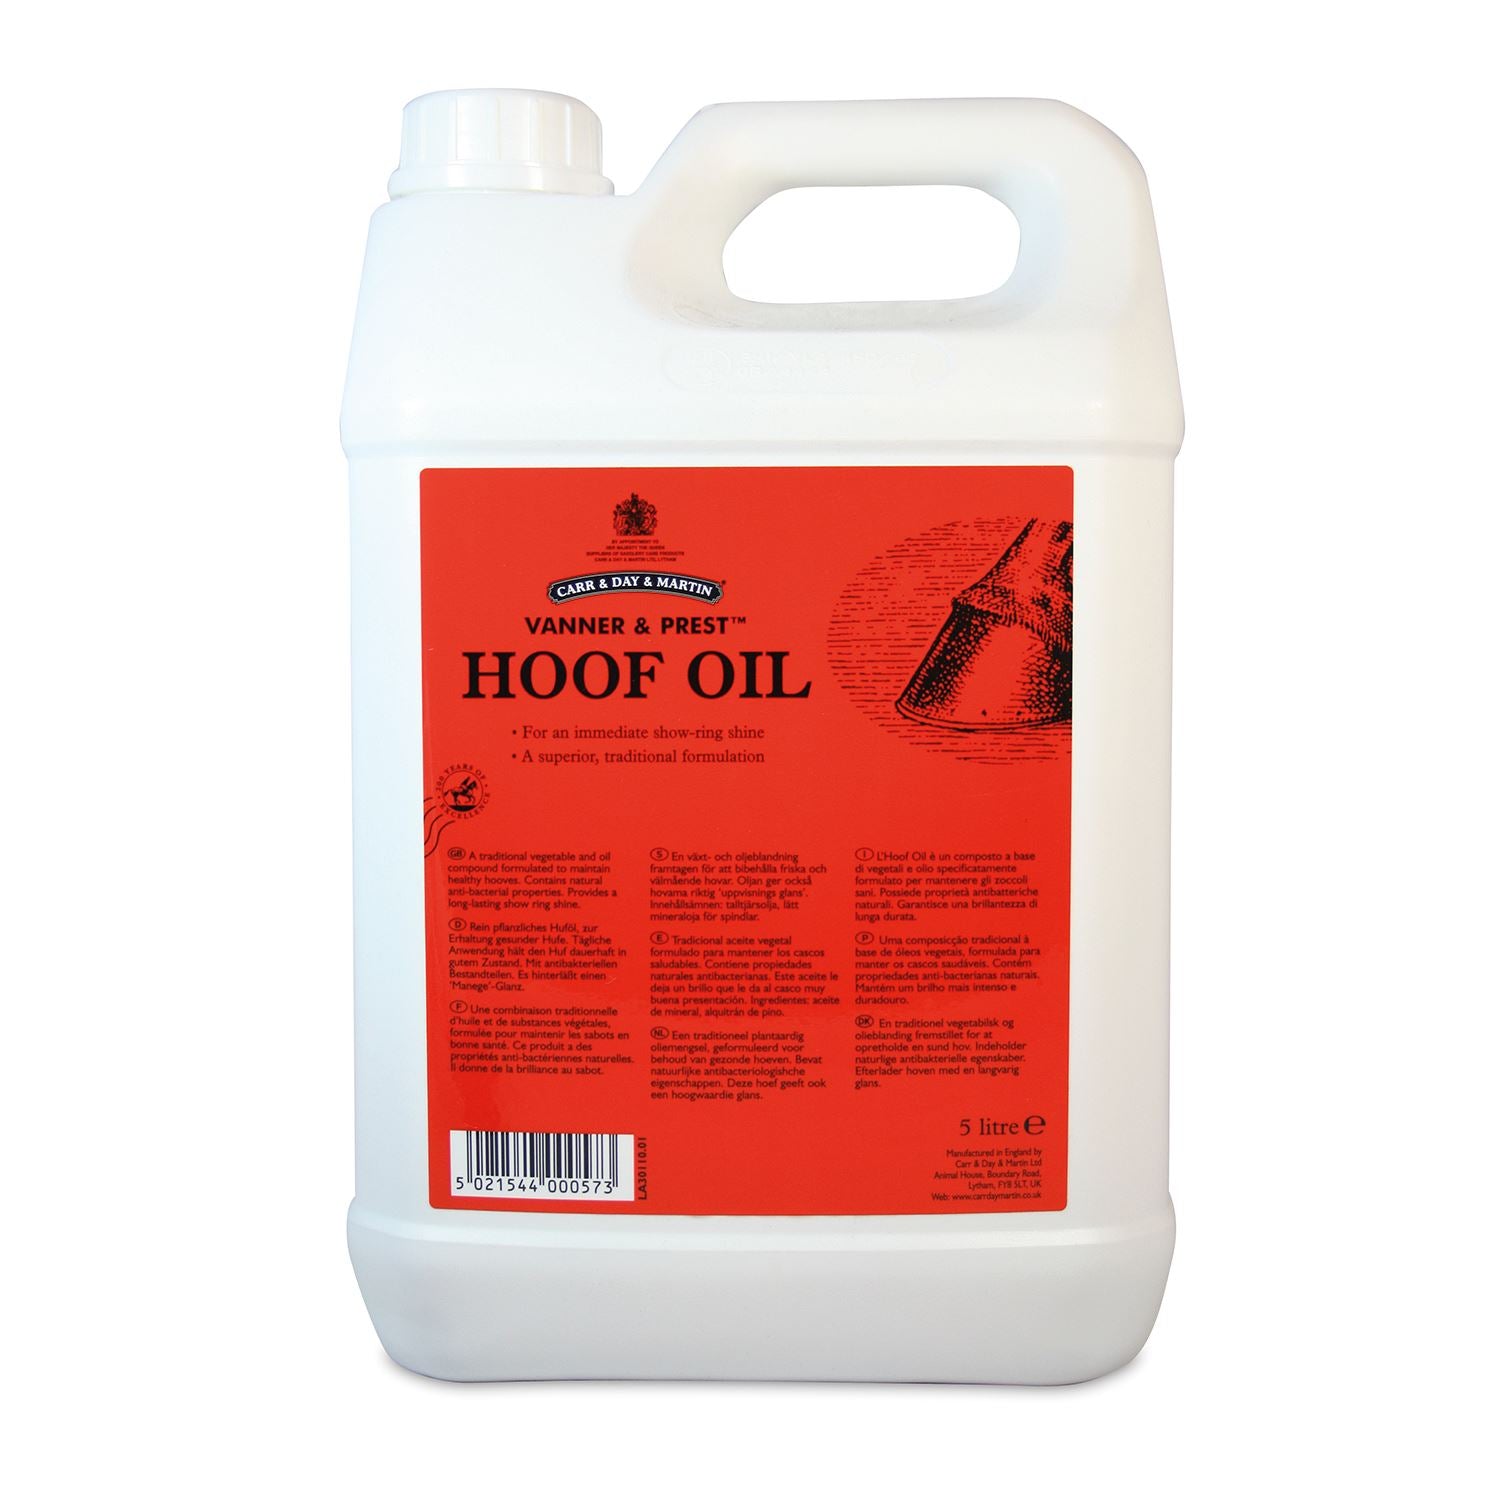 Carr & Day & Martin Vanner & Prest Hoof Oil - Just Horse Riders